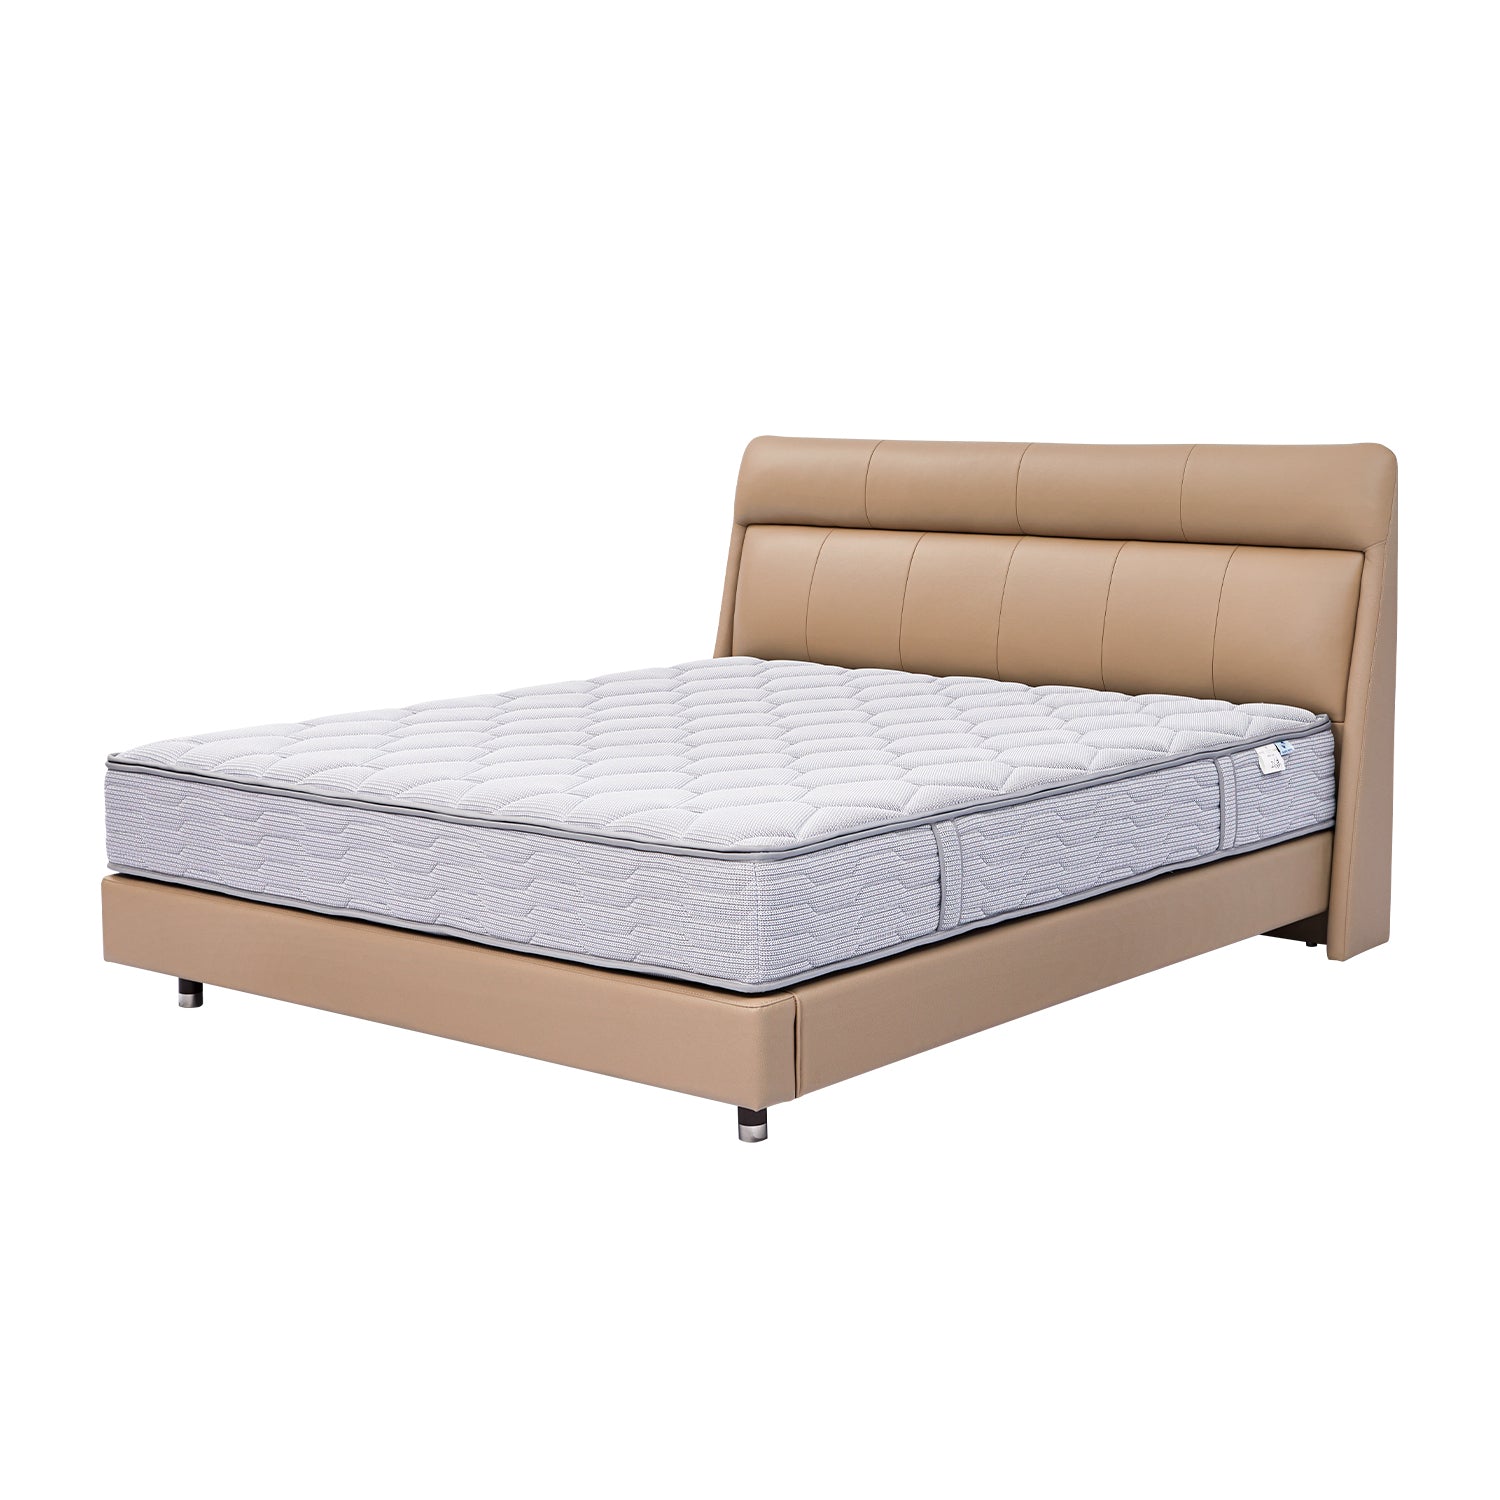 DeRUCCI BOC1-011 stylish brown leather bed frame with a grey quilted mattress, featuring a contemporary headboard design and sturdy metal legs